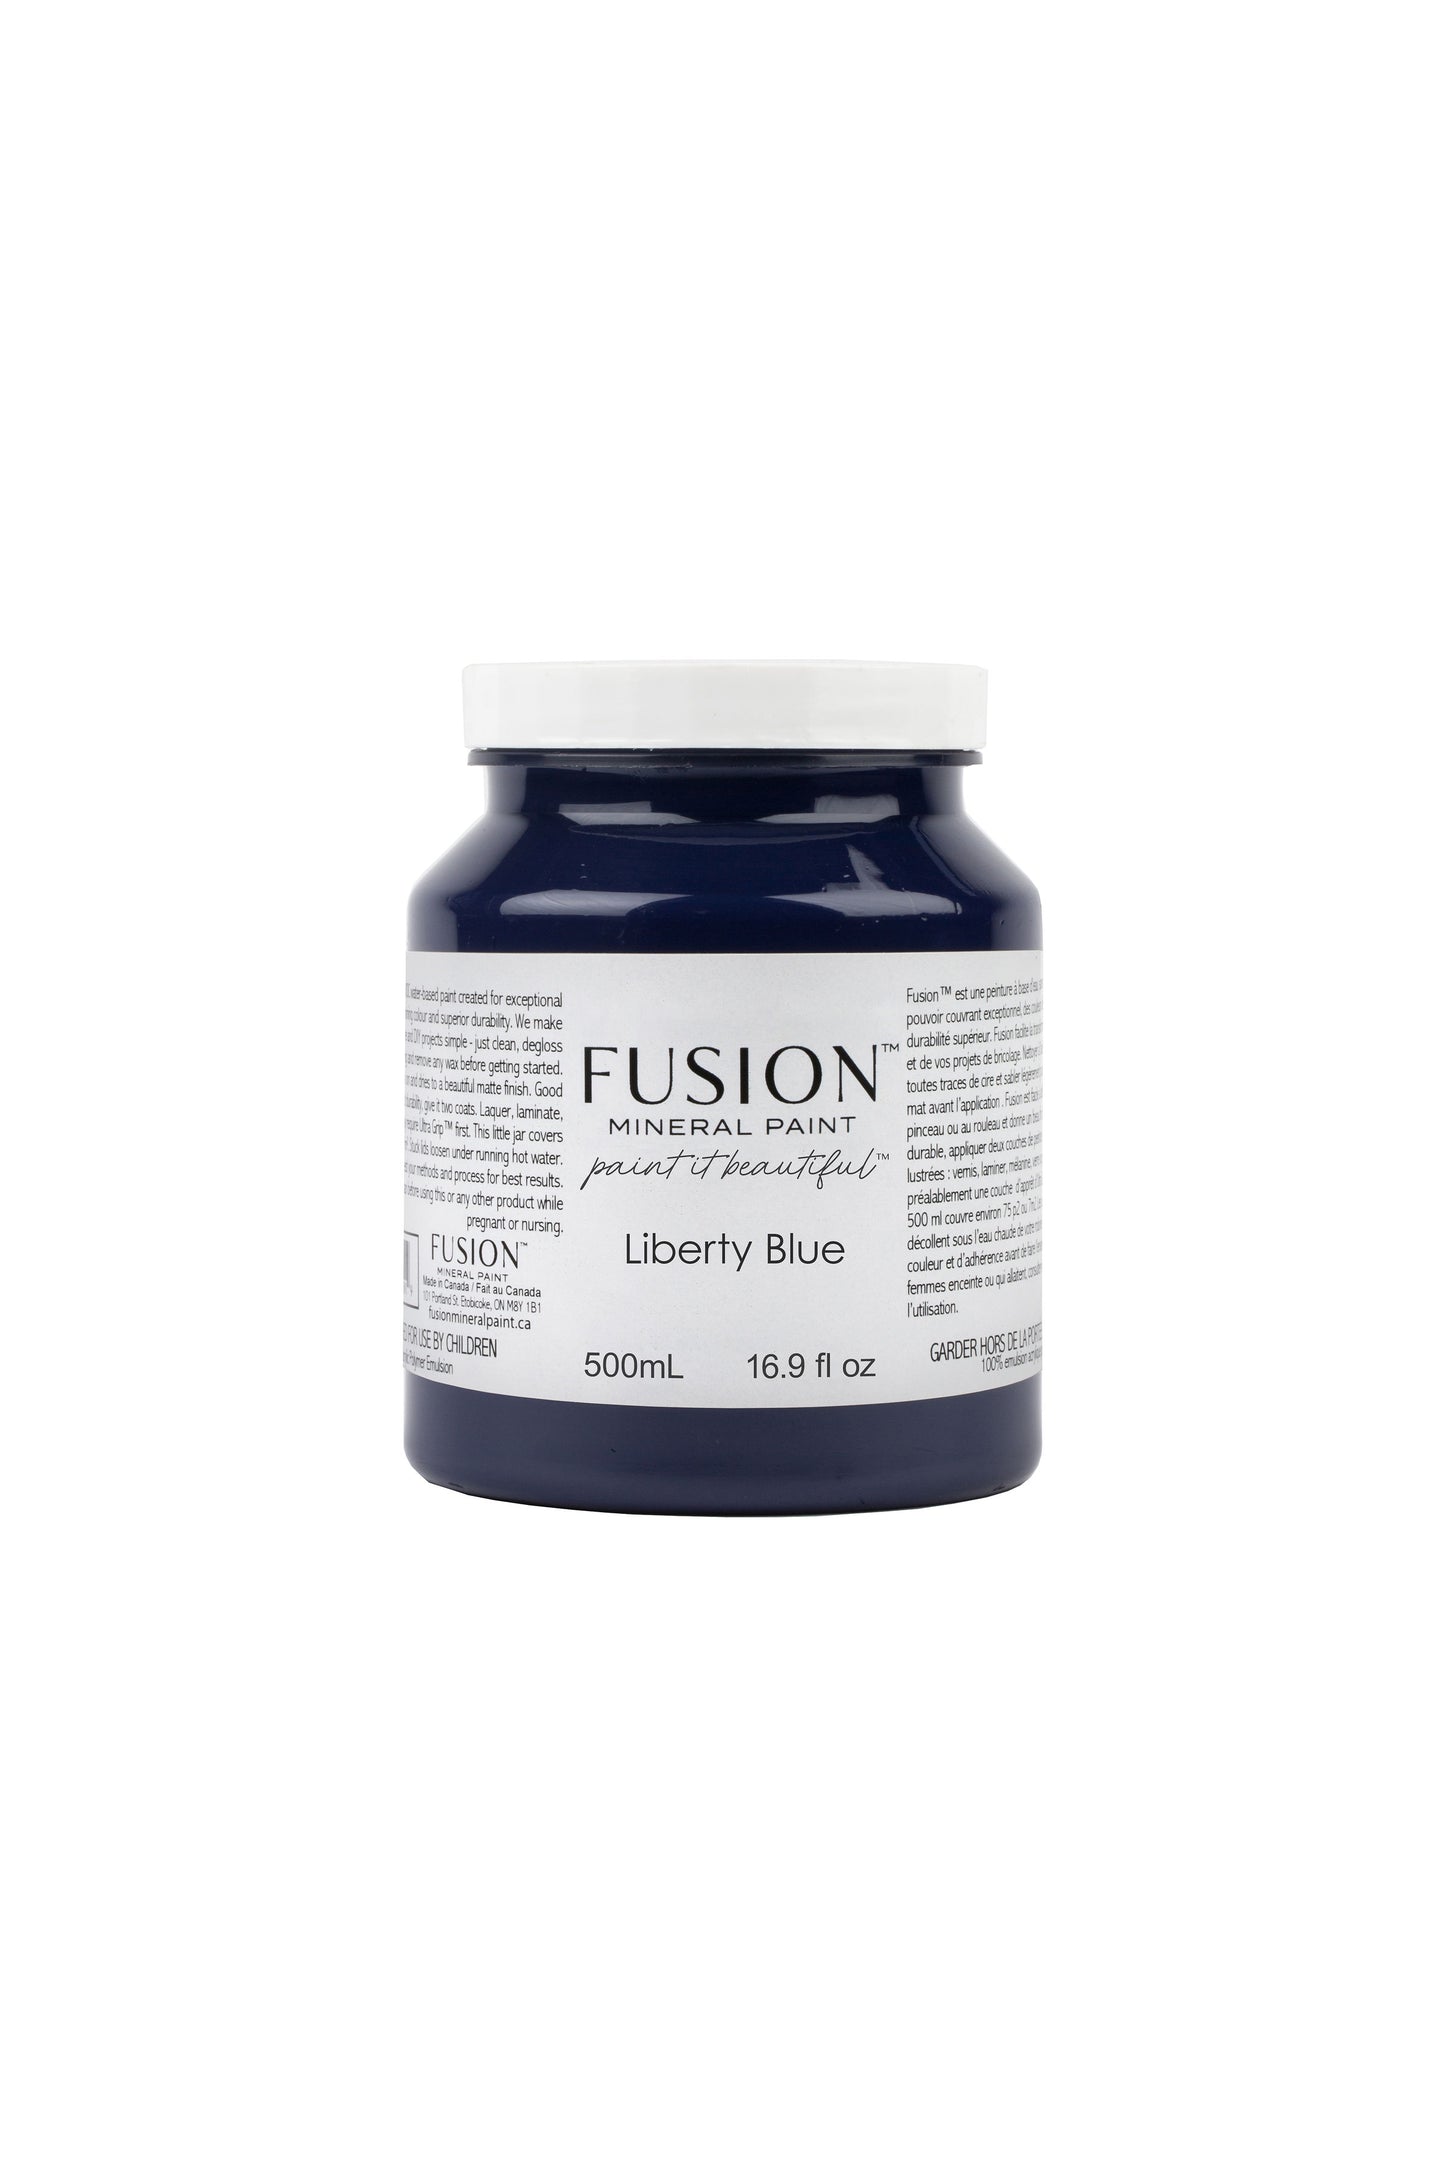 FUSION MINERAL PAINT- Liberty Blue